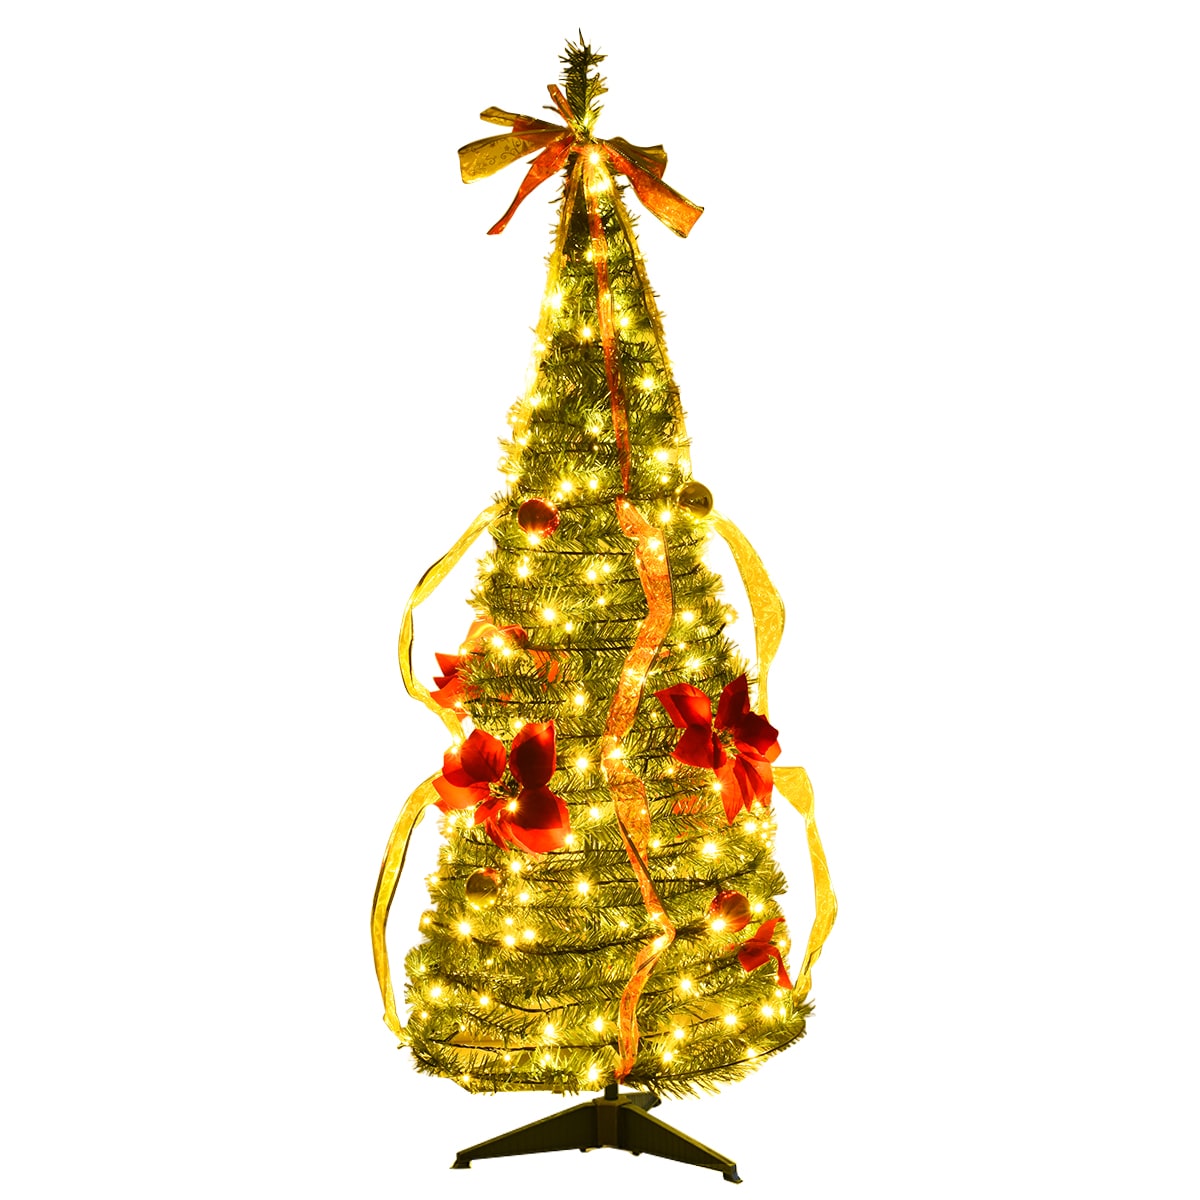 Goplus 4-ft Pre-lit Artificial Christmas Tree with 250 Multi-function LED  Lights at